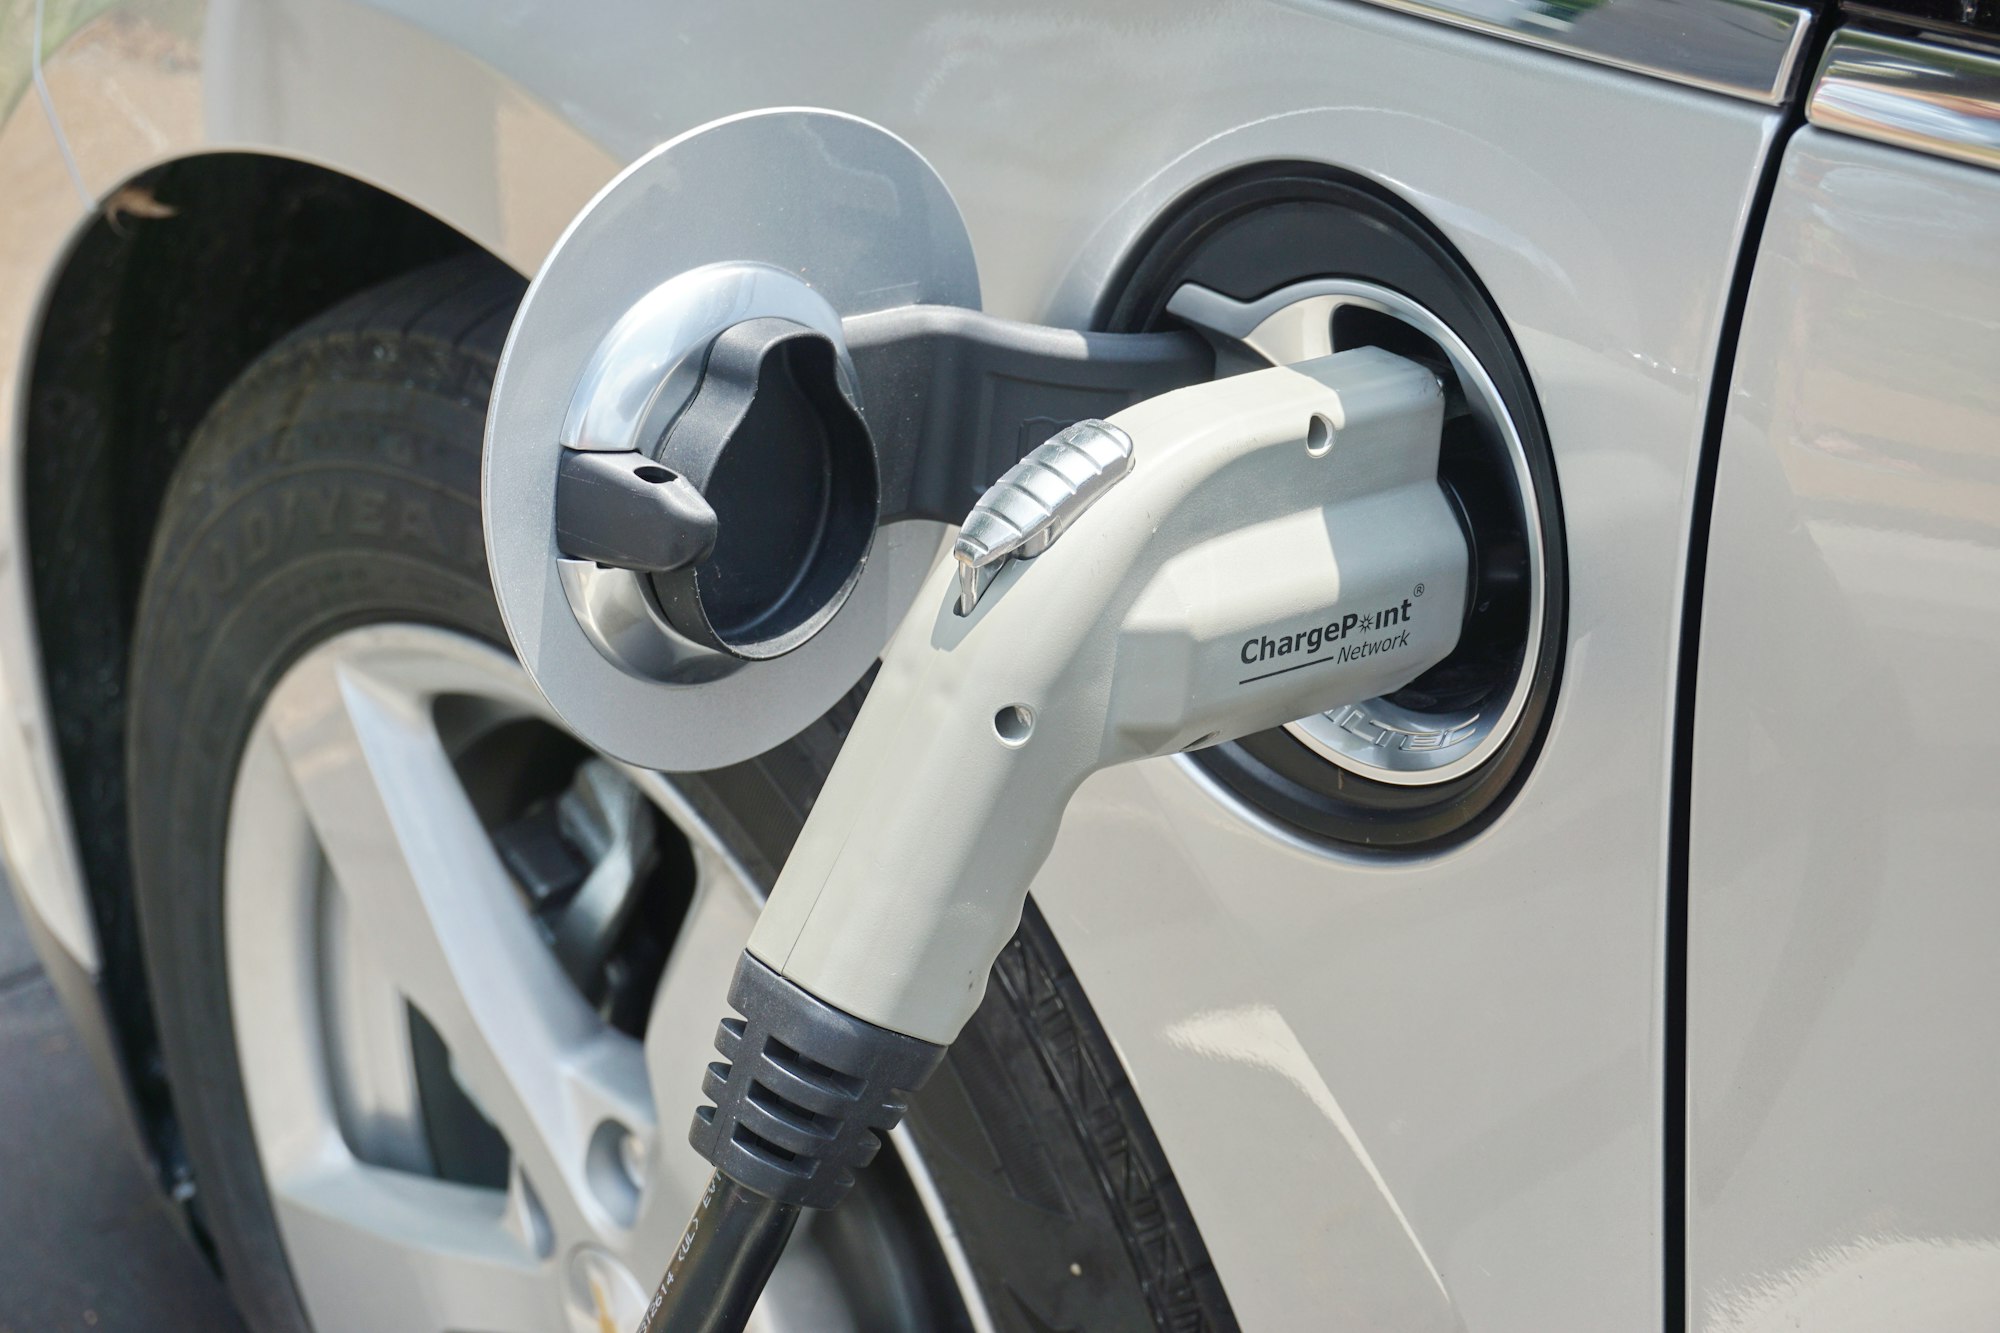 China's Electric Vehicle Market Expected to Grow 35% Annually, Reaching 8.8 Million Units by 2023